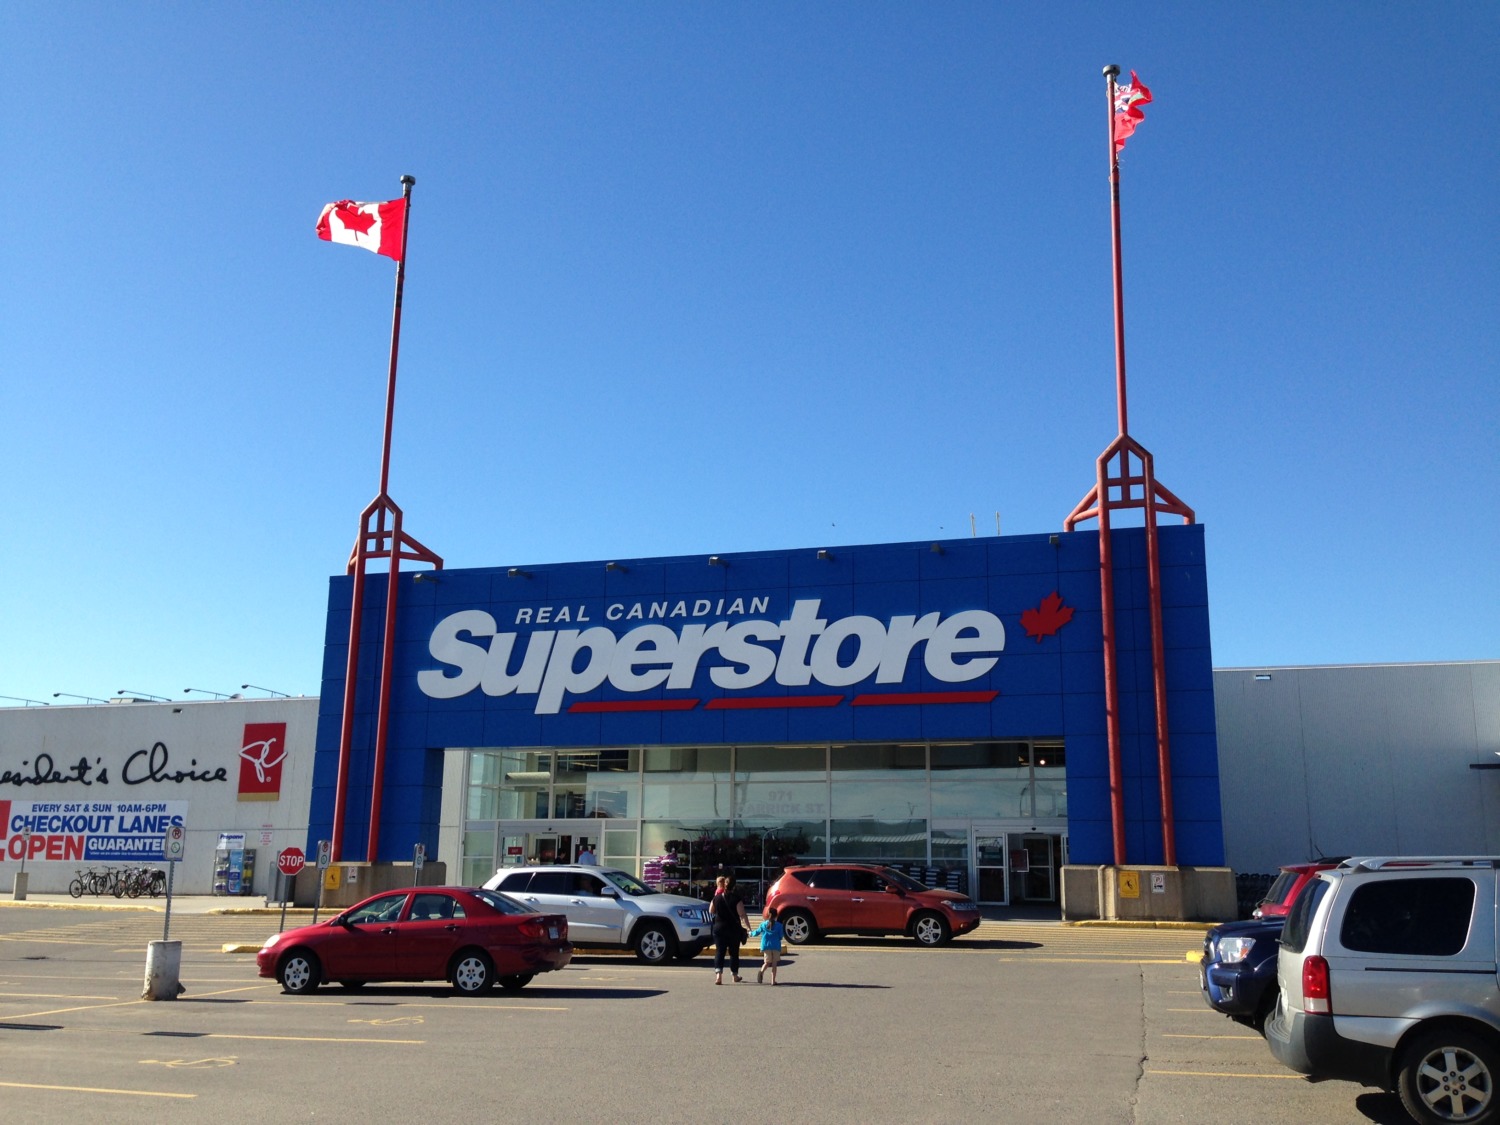 Real Canadian Superstore - Sharing Horizons